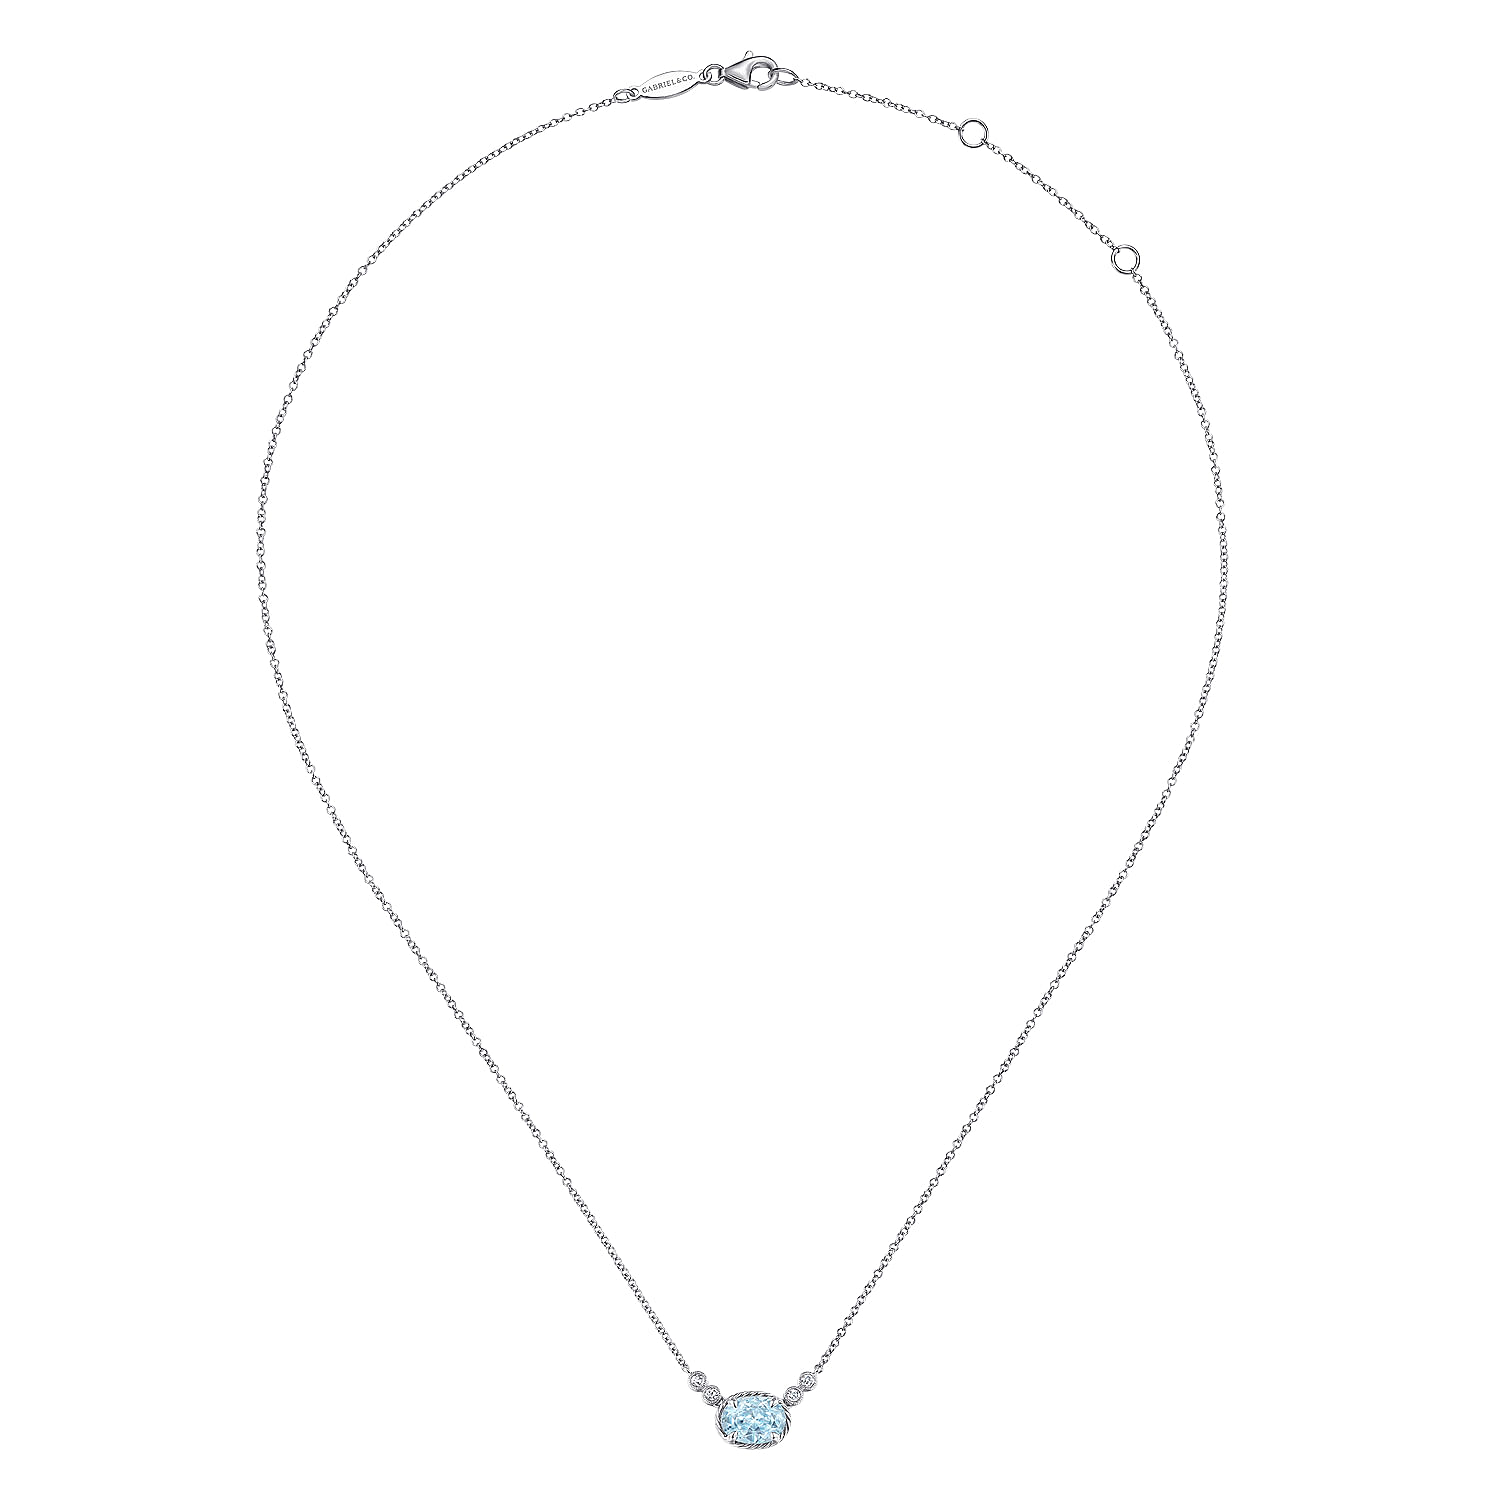 14K White Gold Oval Aquamarine Pendant Necklace with Diamond Accents